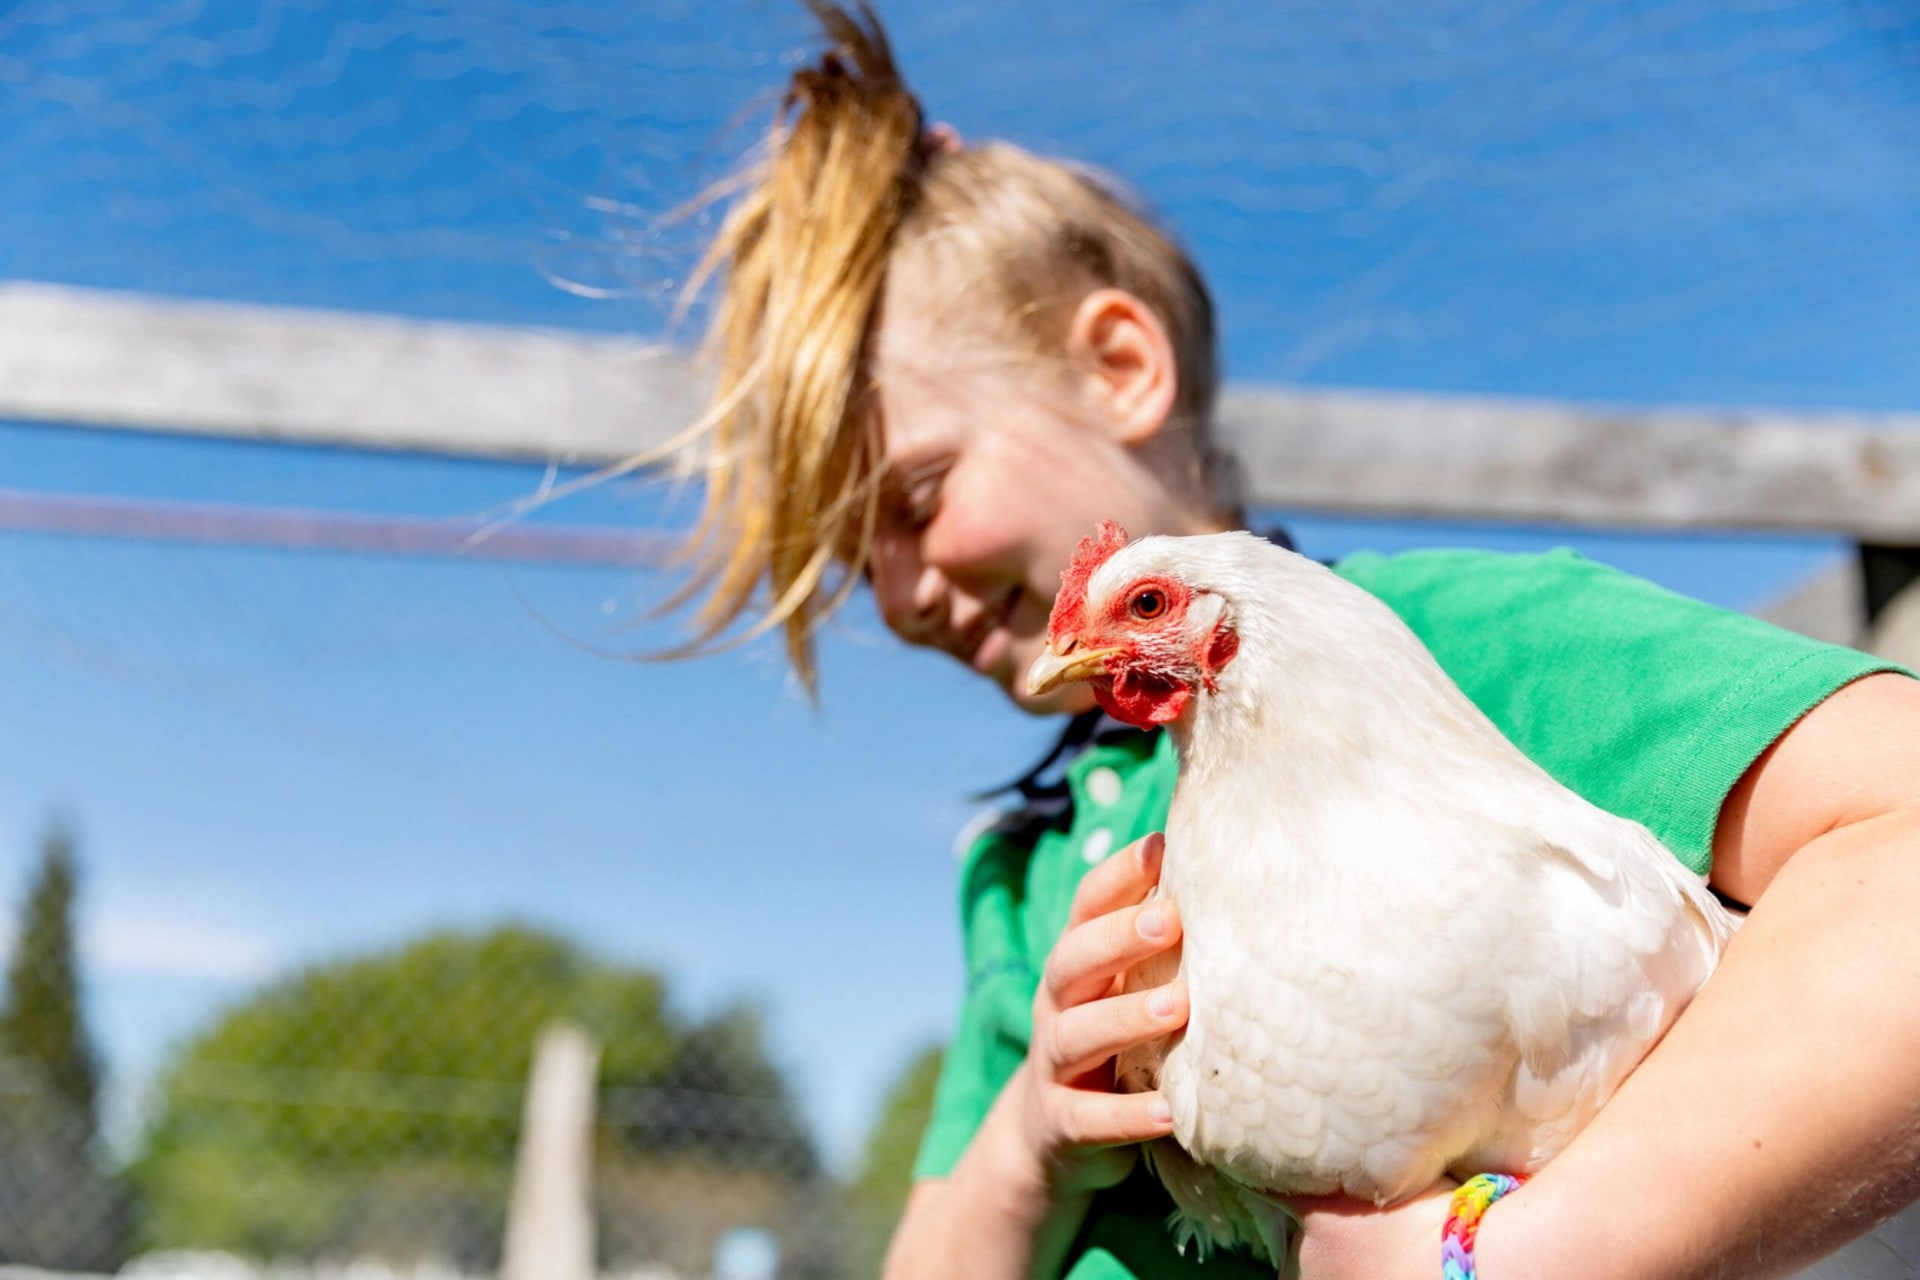 Girl with high blonde pony tail holding live chicken